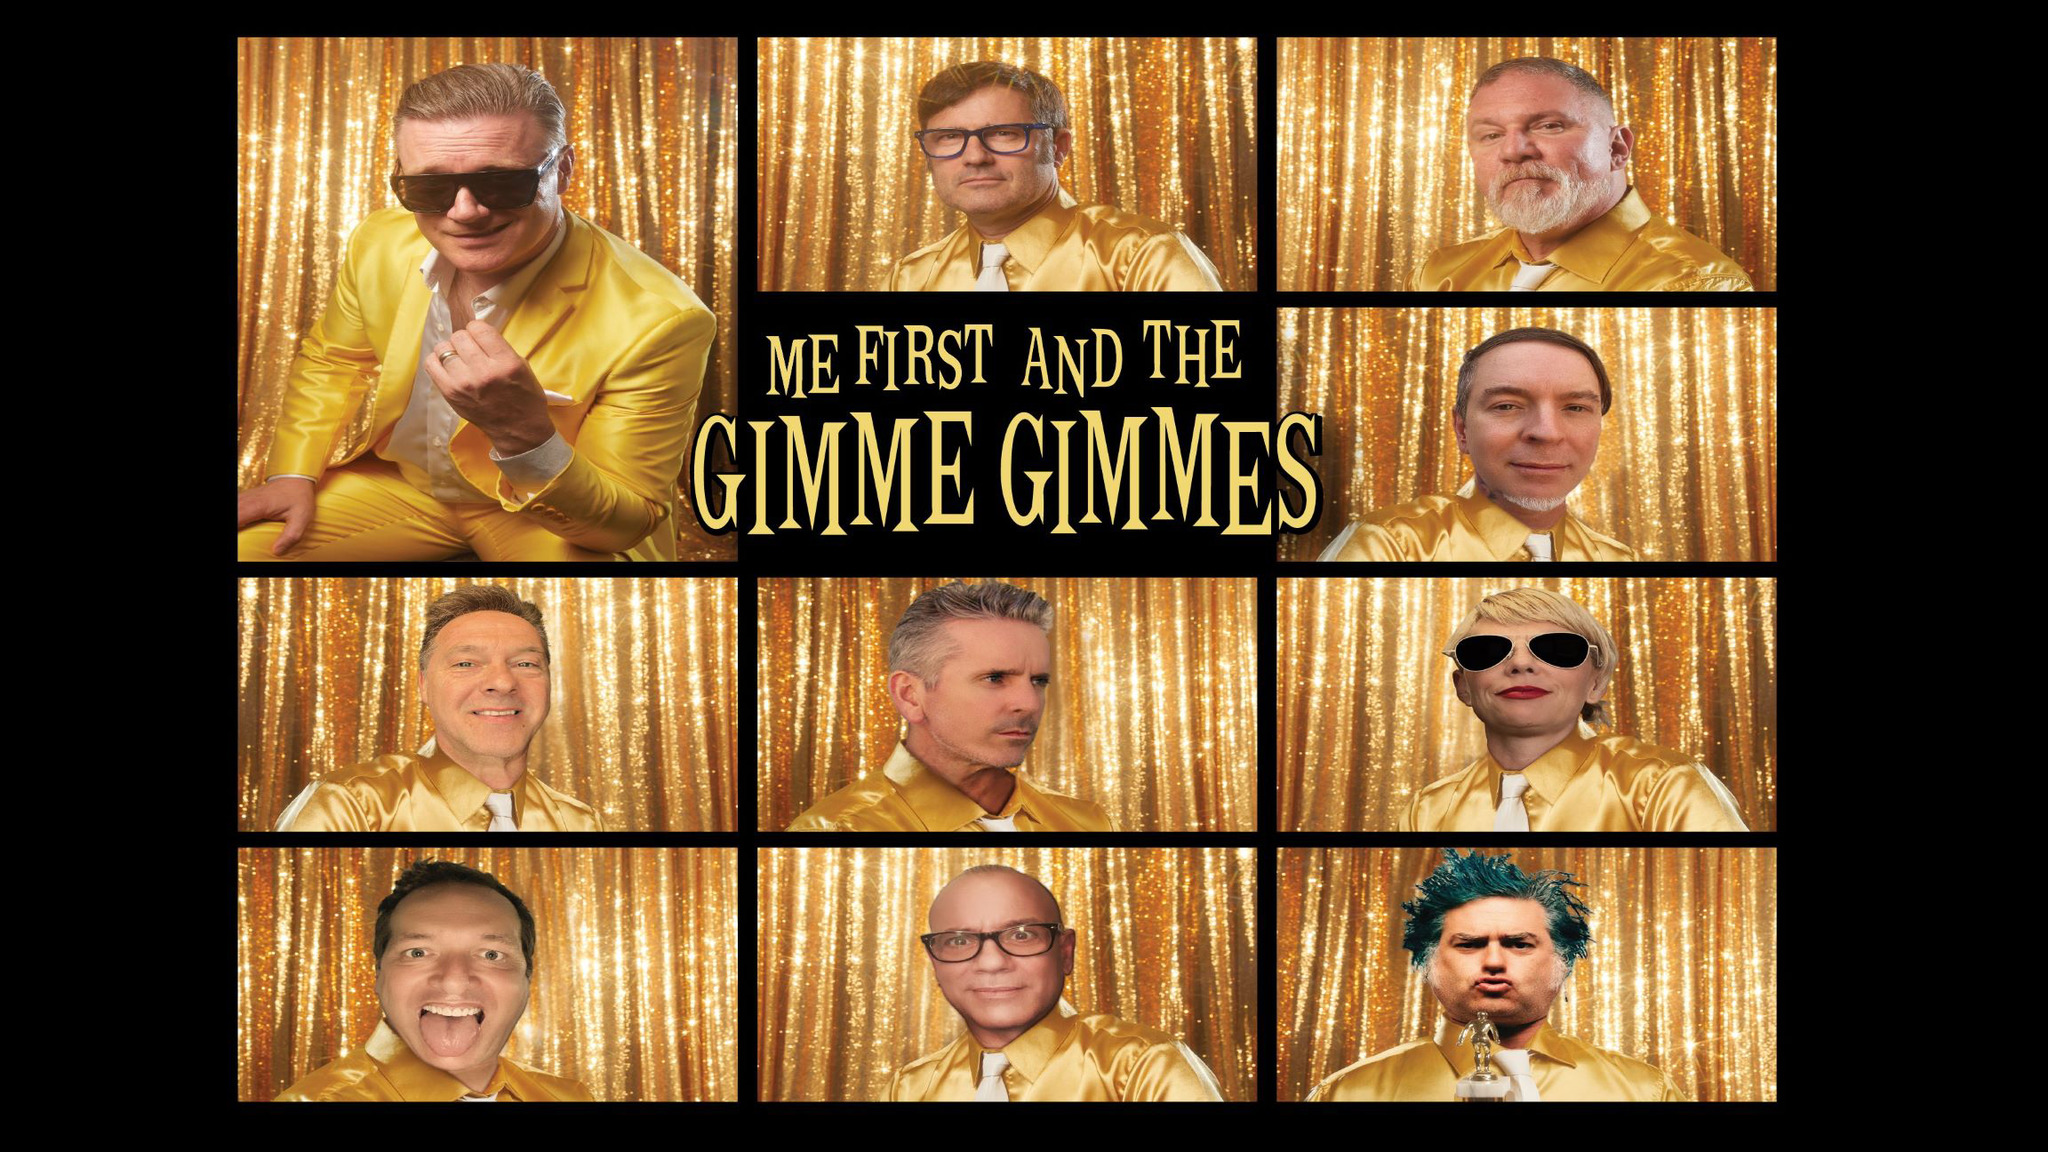 Me First and the Gimme Gimmes Tickets, 20222023 Concert Tour Dates